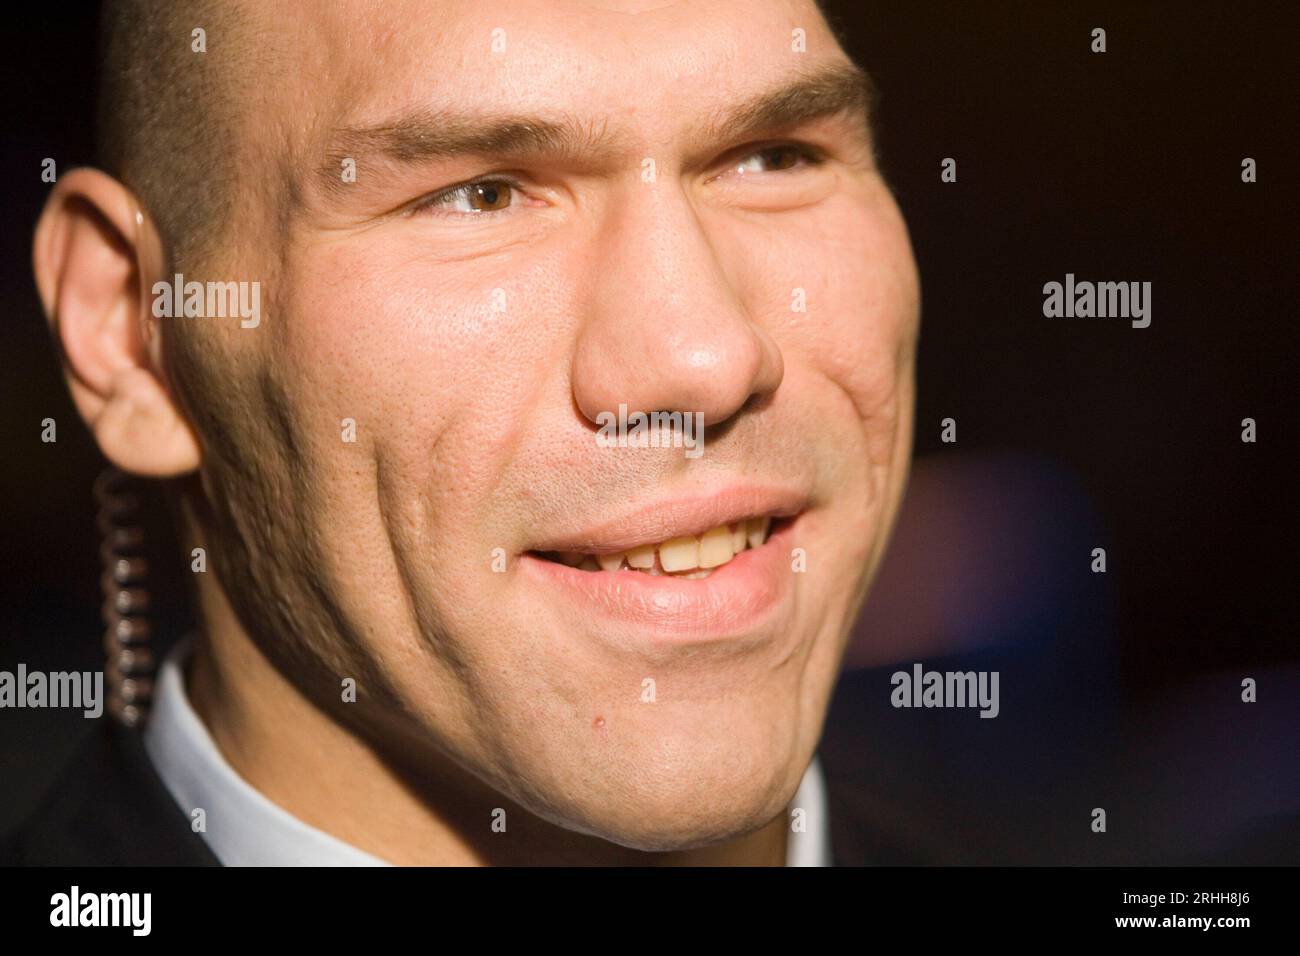 ARCHIVE PHOTO: Nikolai VALUEV will be 50 years old on August 21, 2023, 41SN WBA 181106.jpg Guest at the ring: WBA world champion Nicolai VALUEV boxing WBA heavyweight elimination fight Ruslan CHAGAEV vs. John RUIZ on November 18, 2006 in Duesseldorf ?Sven Simon#Prinzess-Luise- Strasse 41#45479 Muelheim/R uhr #tel. 0208/9413250#fax. 0208/9413260#account. 244 293 433 P ostbank E ssen BLZ 360 100 43# www.SvenSimon.net No use of the internet or online services before the end of the game. Stock Photo